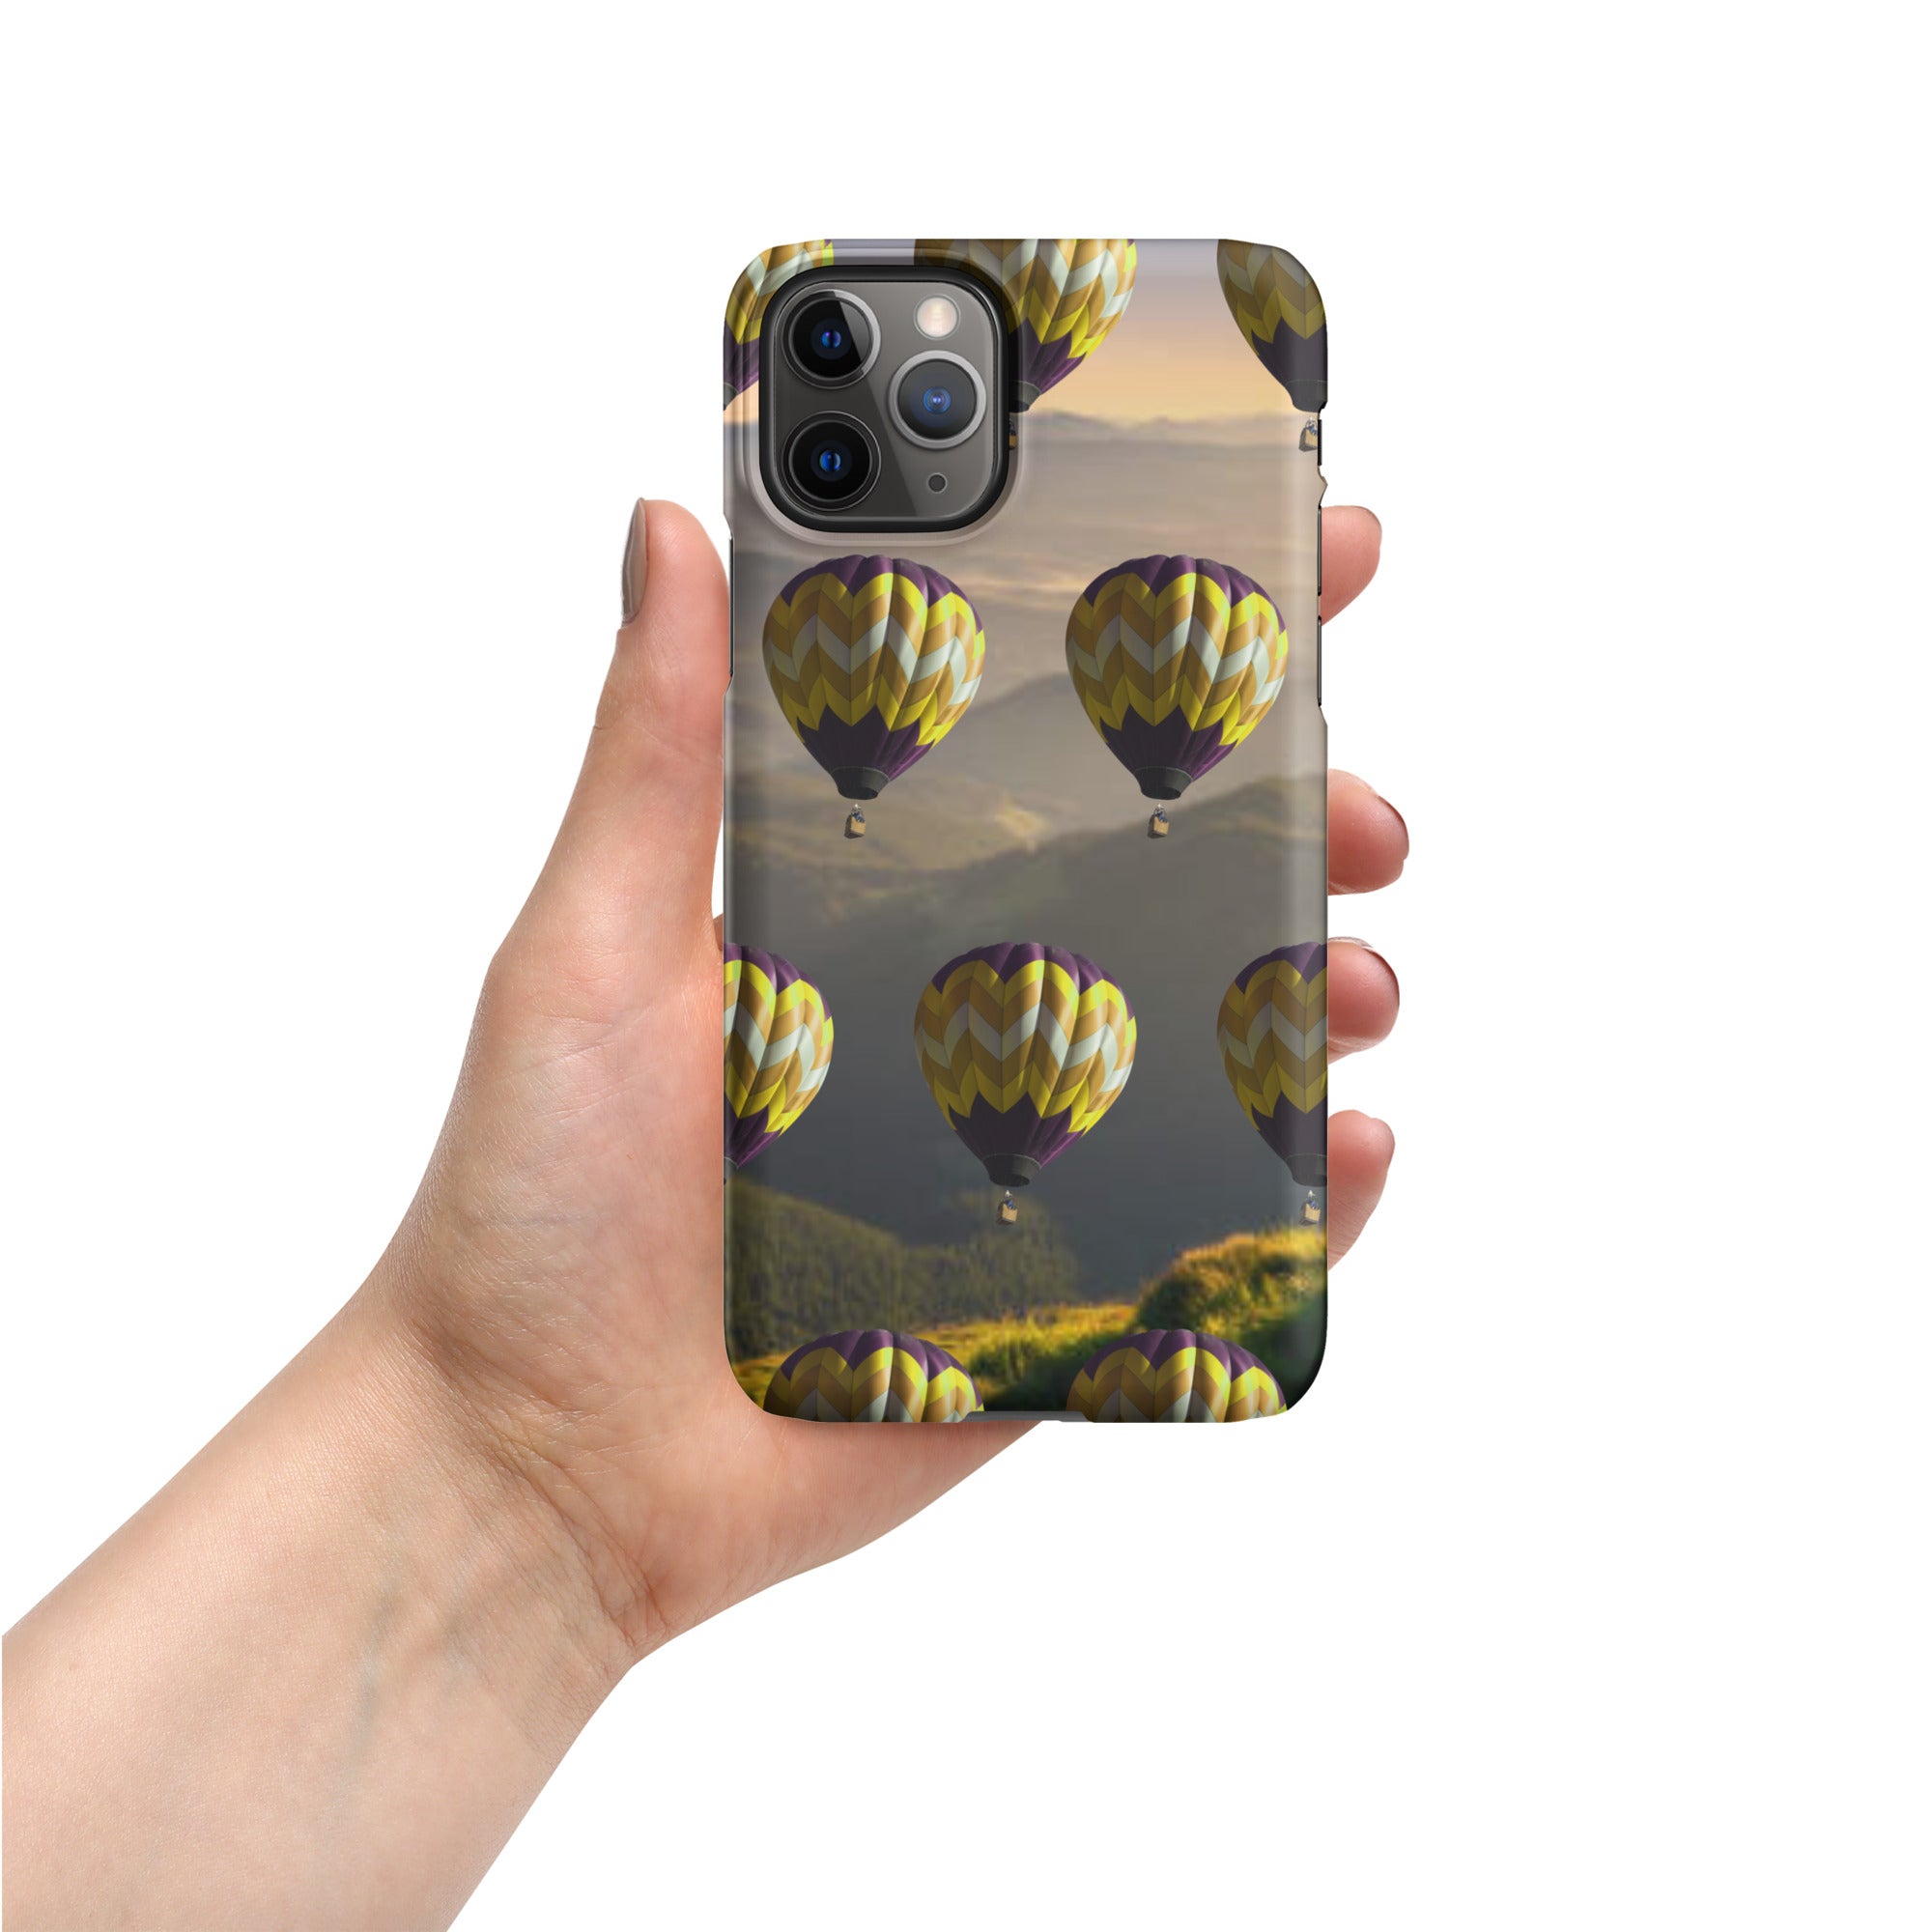 Snap case for iPhone, Customized iPhone Cases, Personalize iPhone Case